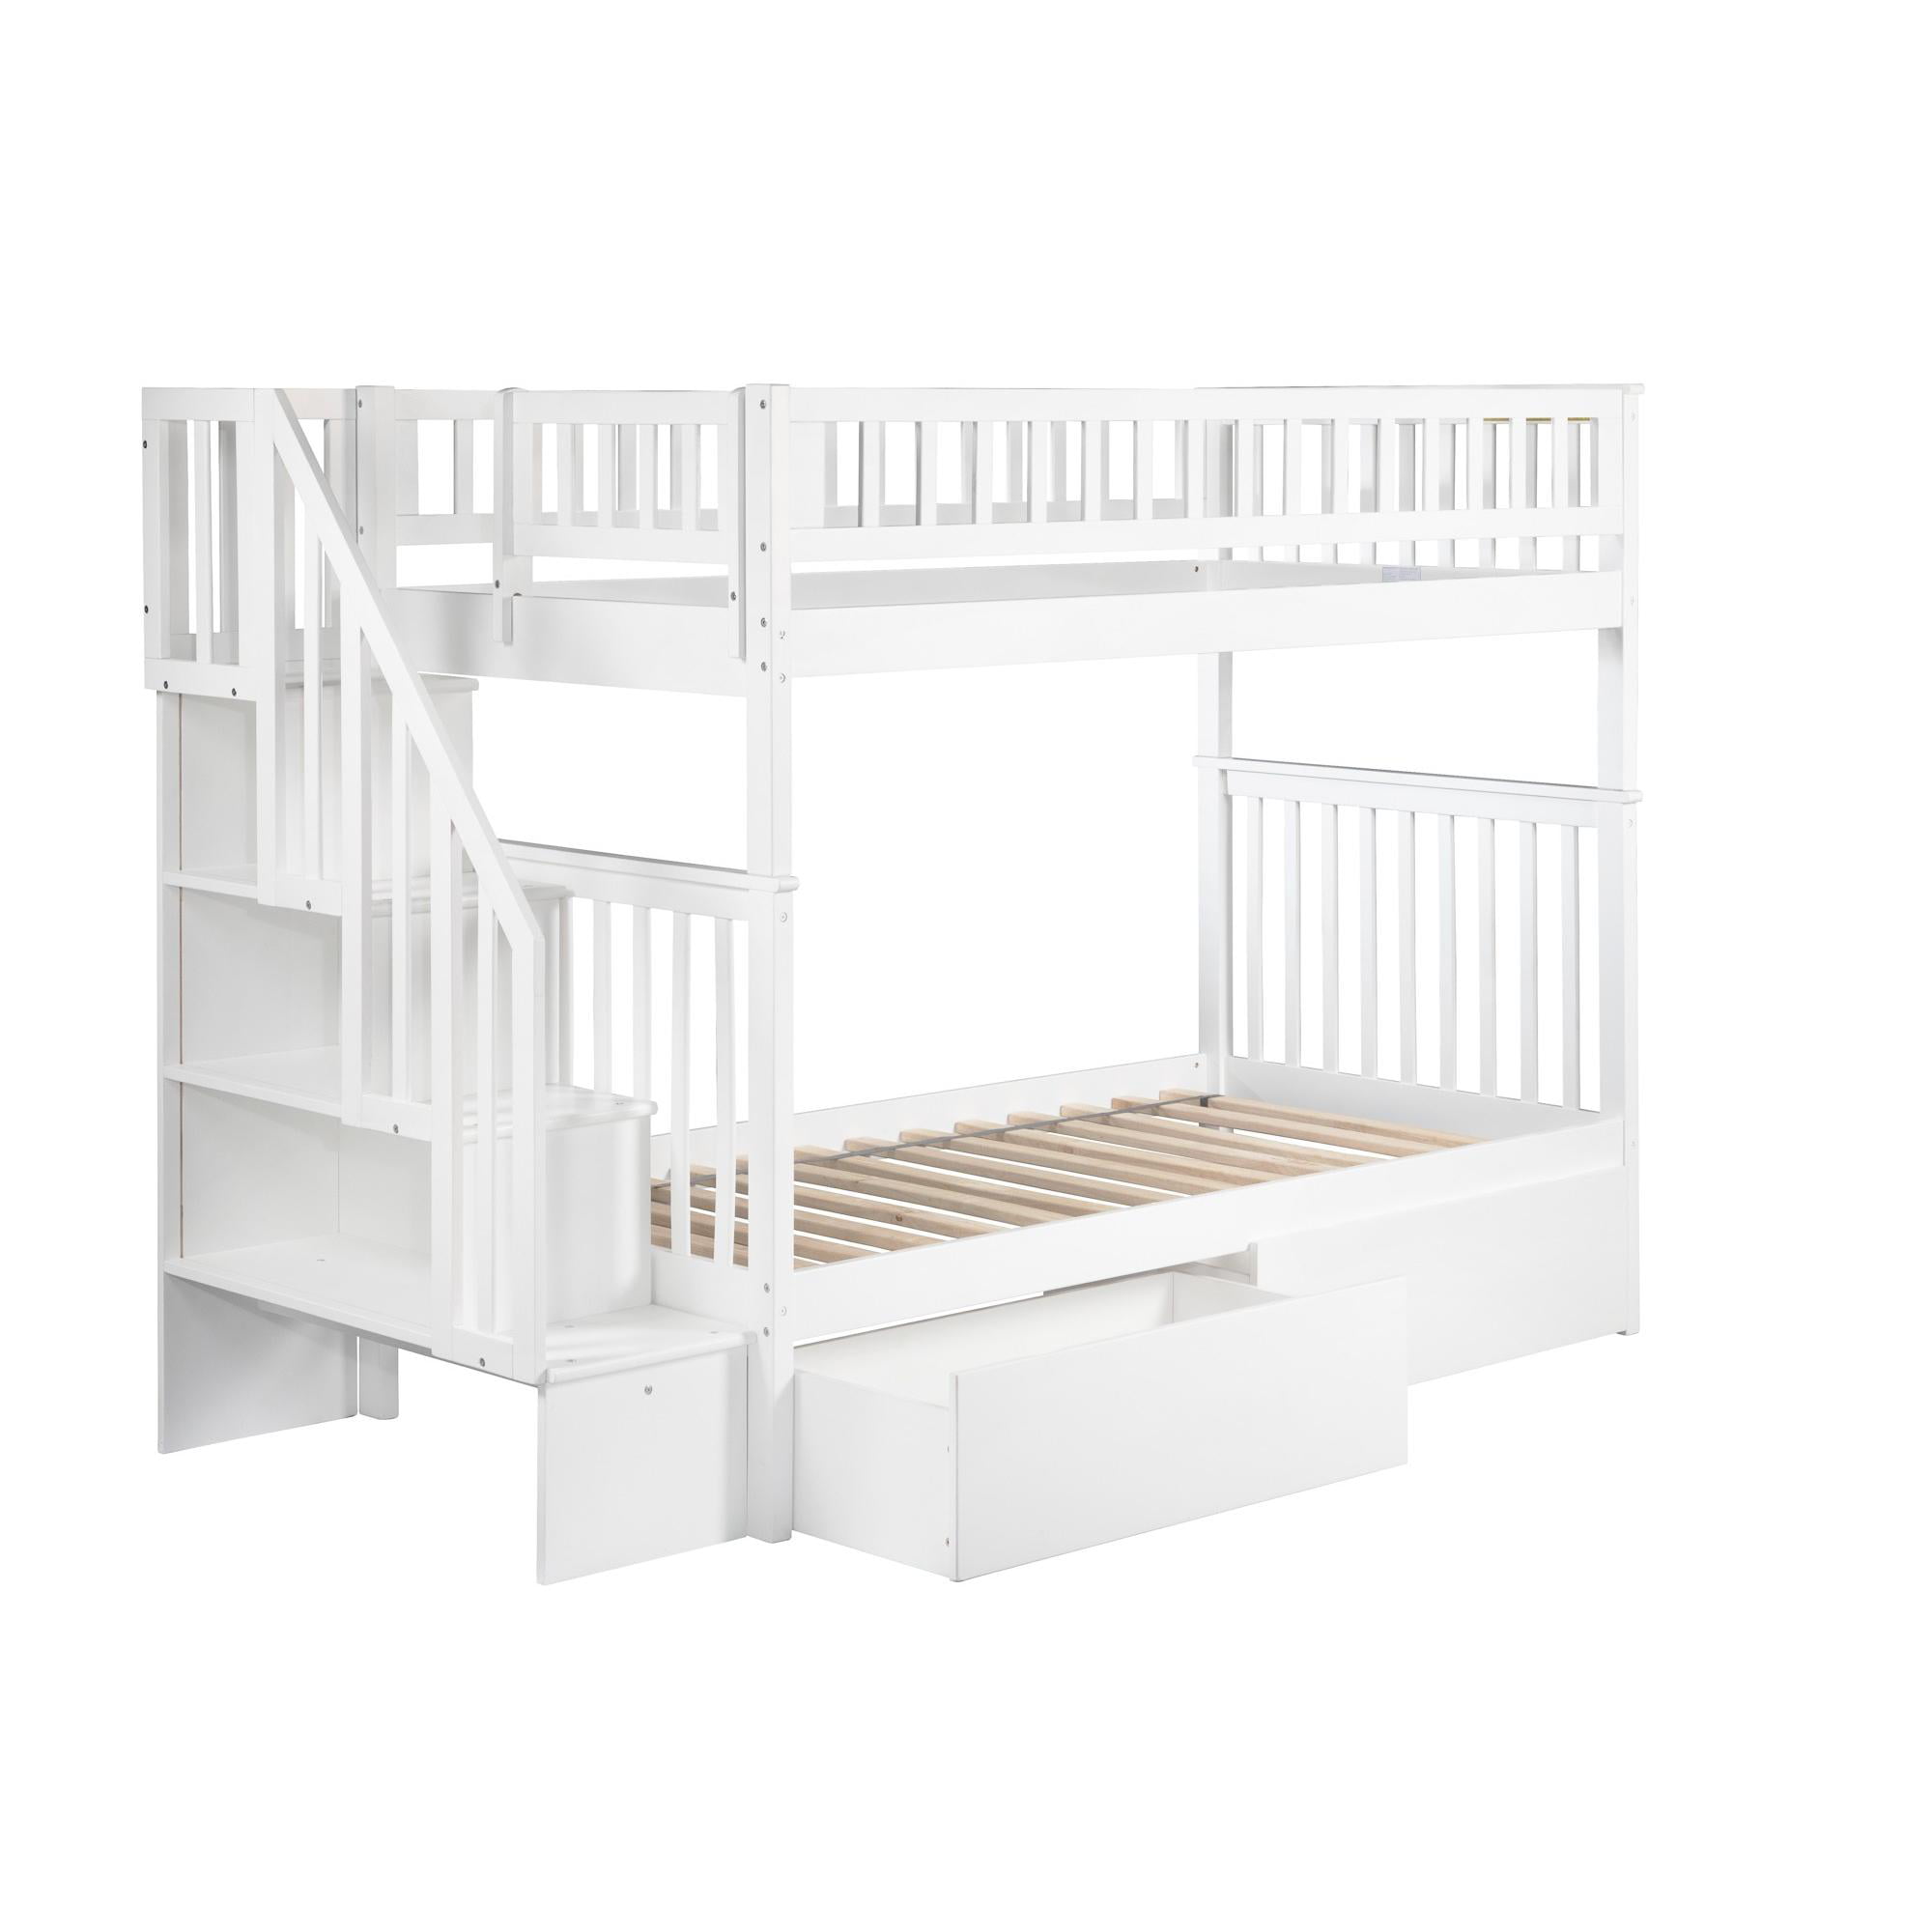 Picture of Atlantic Furniture AB56642 Woodland Staircase Bunk Bed with Urban Bed Drawers, White